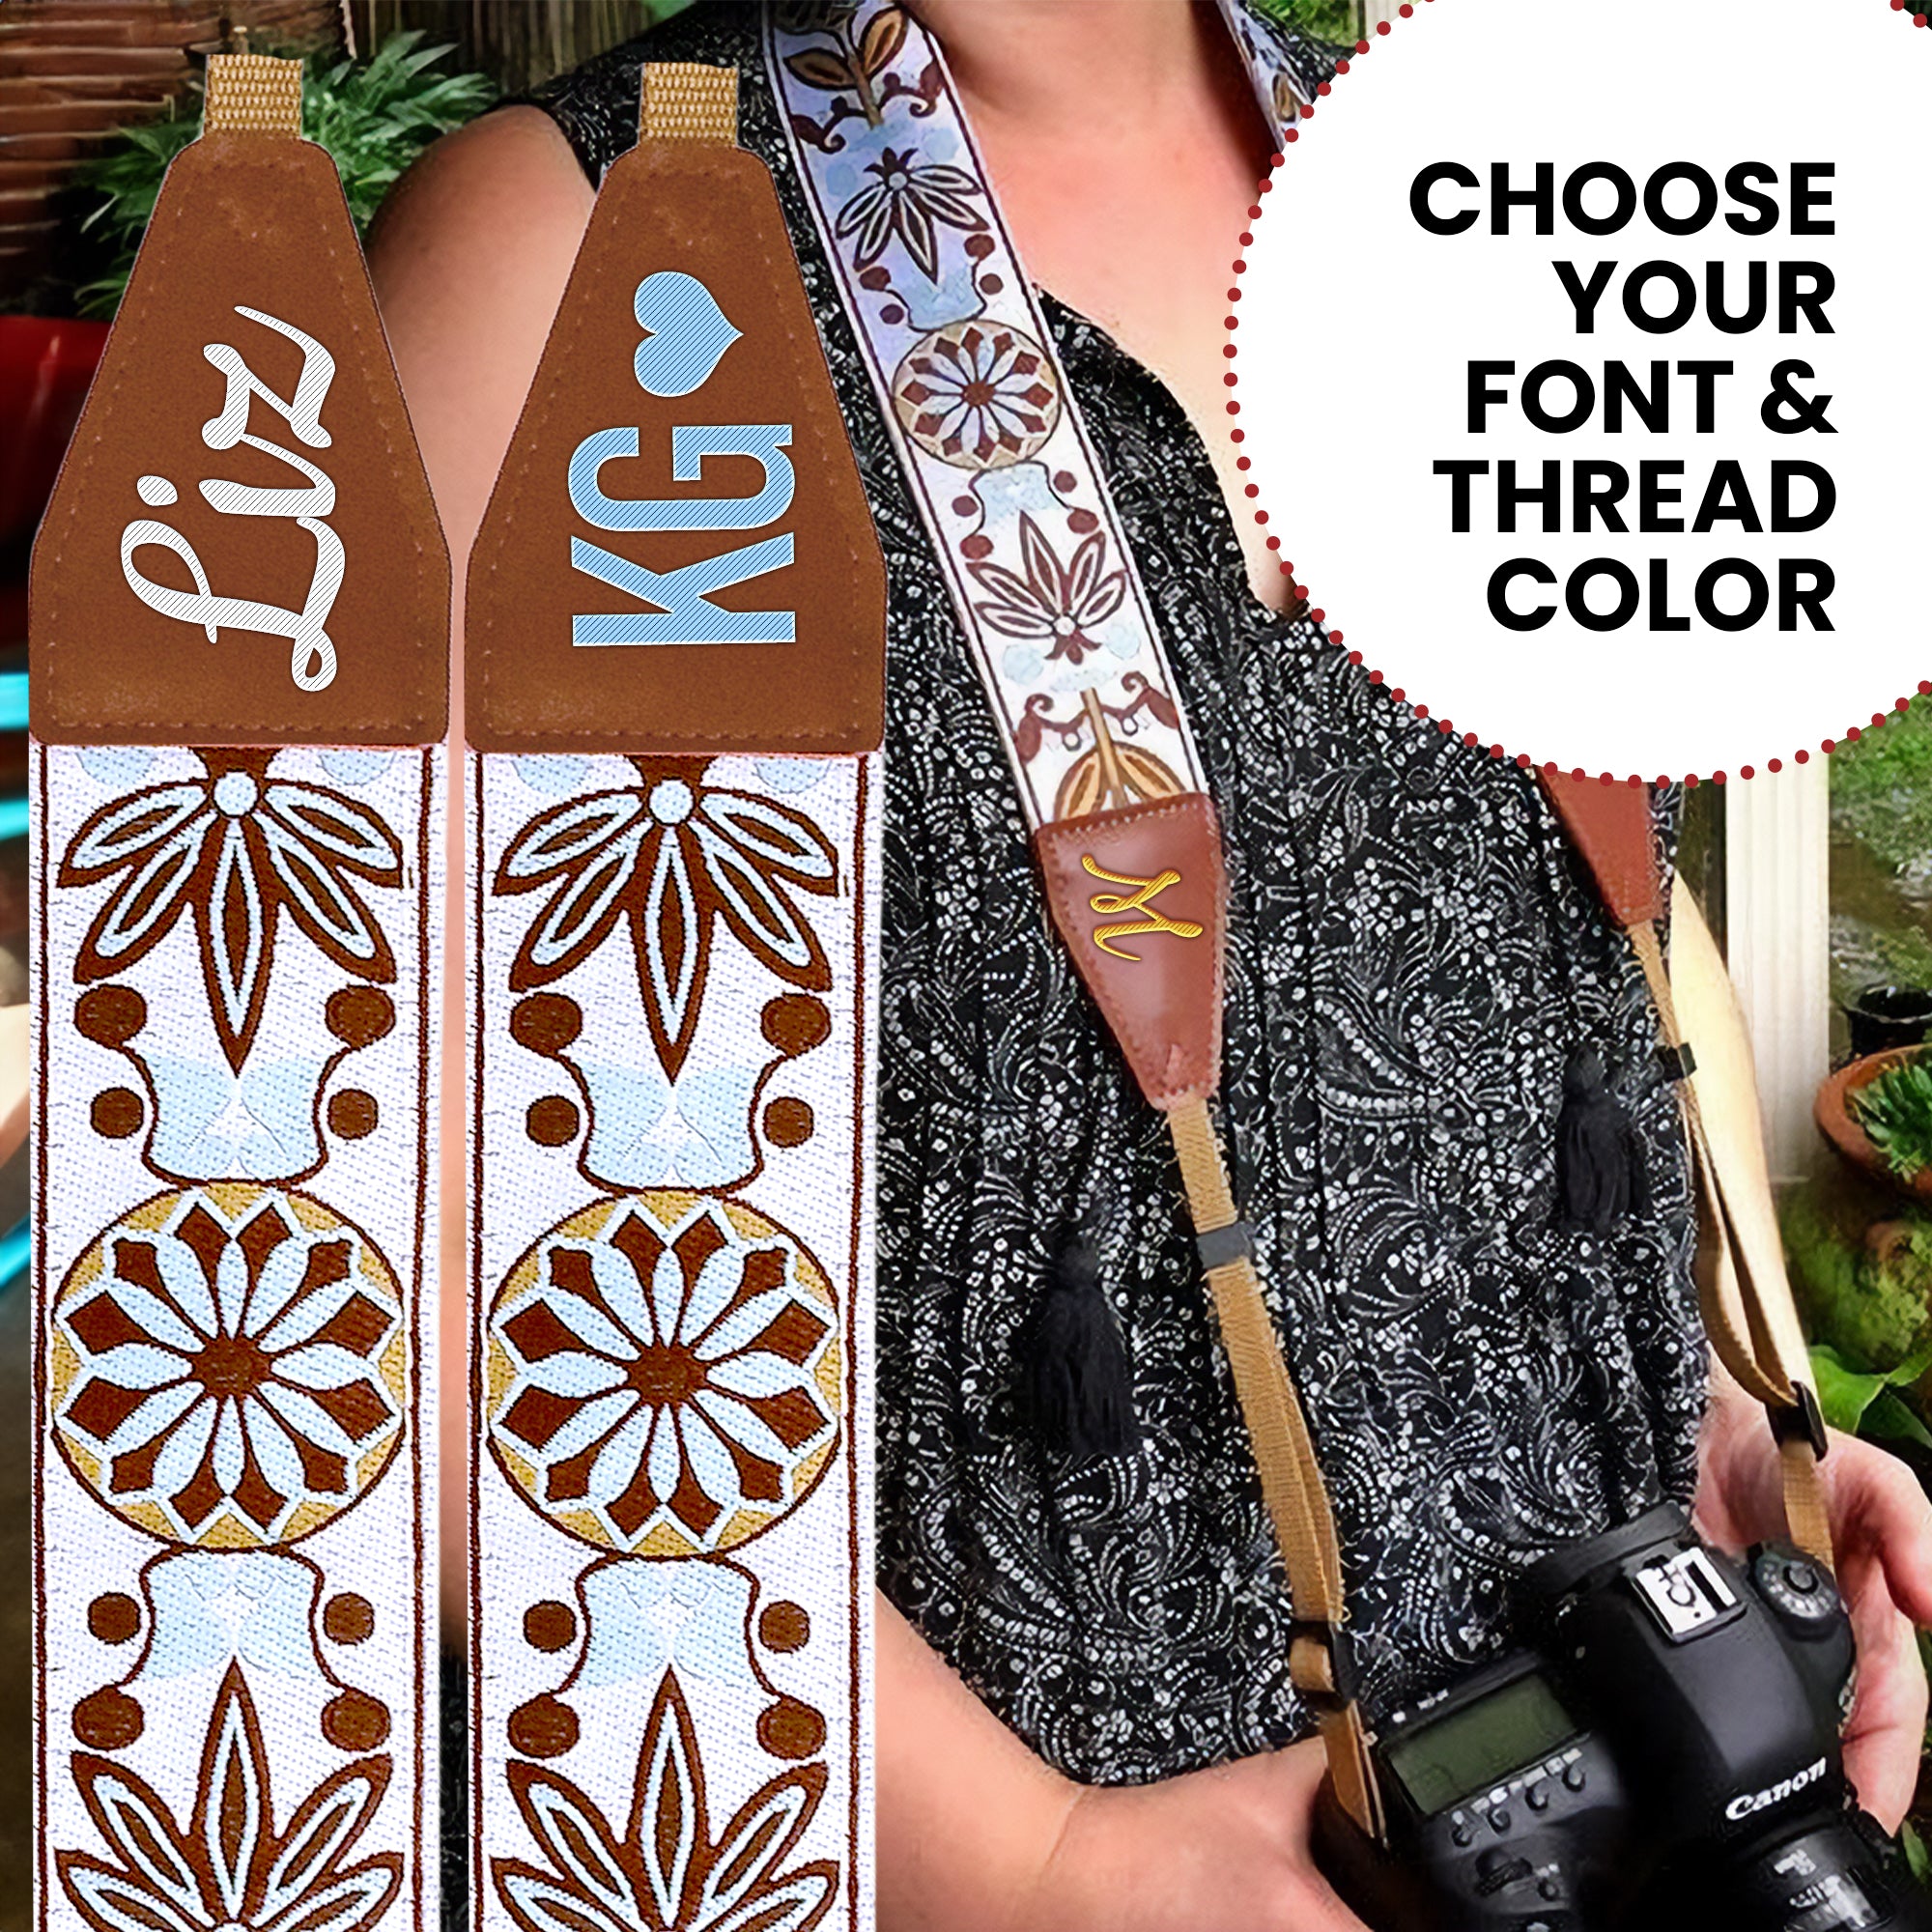 Personalized Camera Strap- Add your text to make your own unique camera strap. Best custom gift